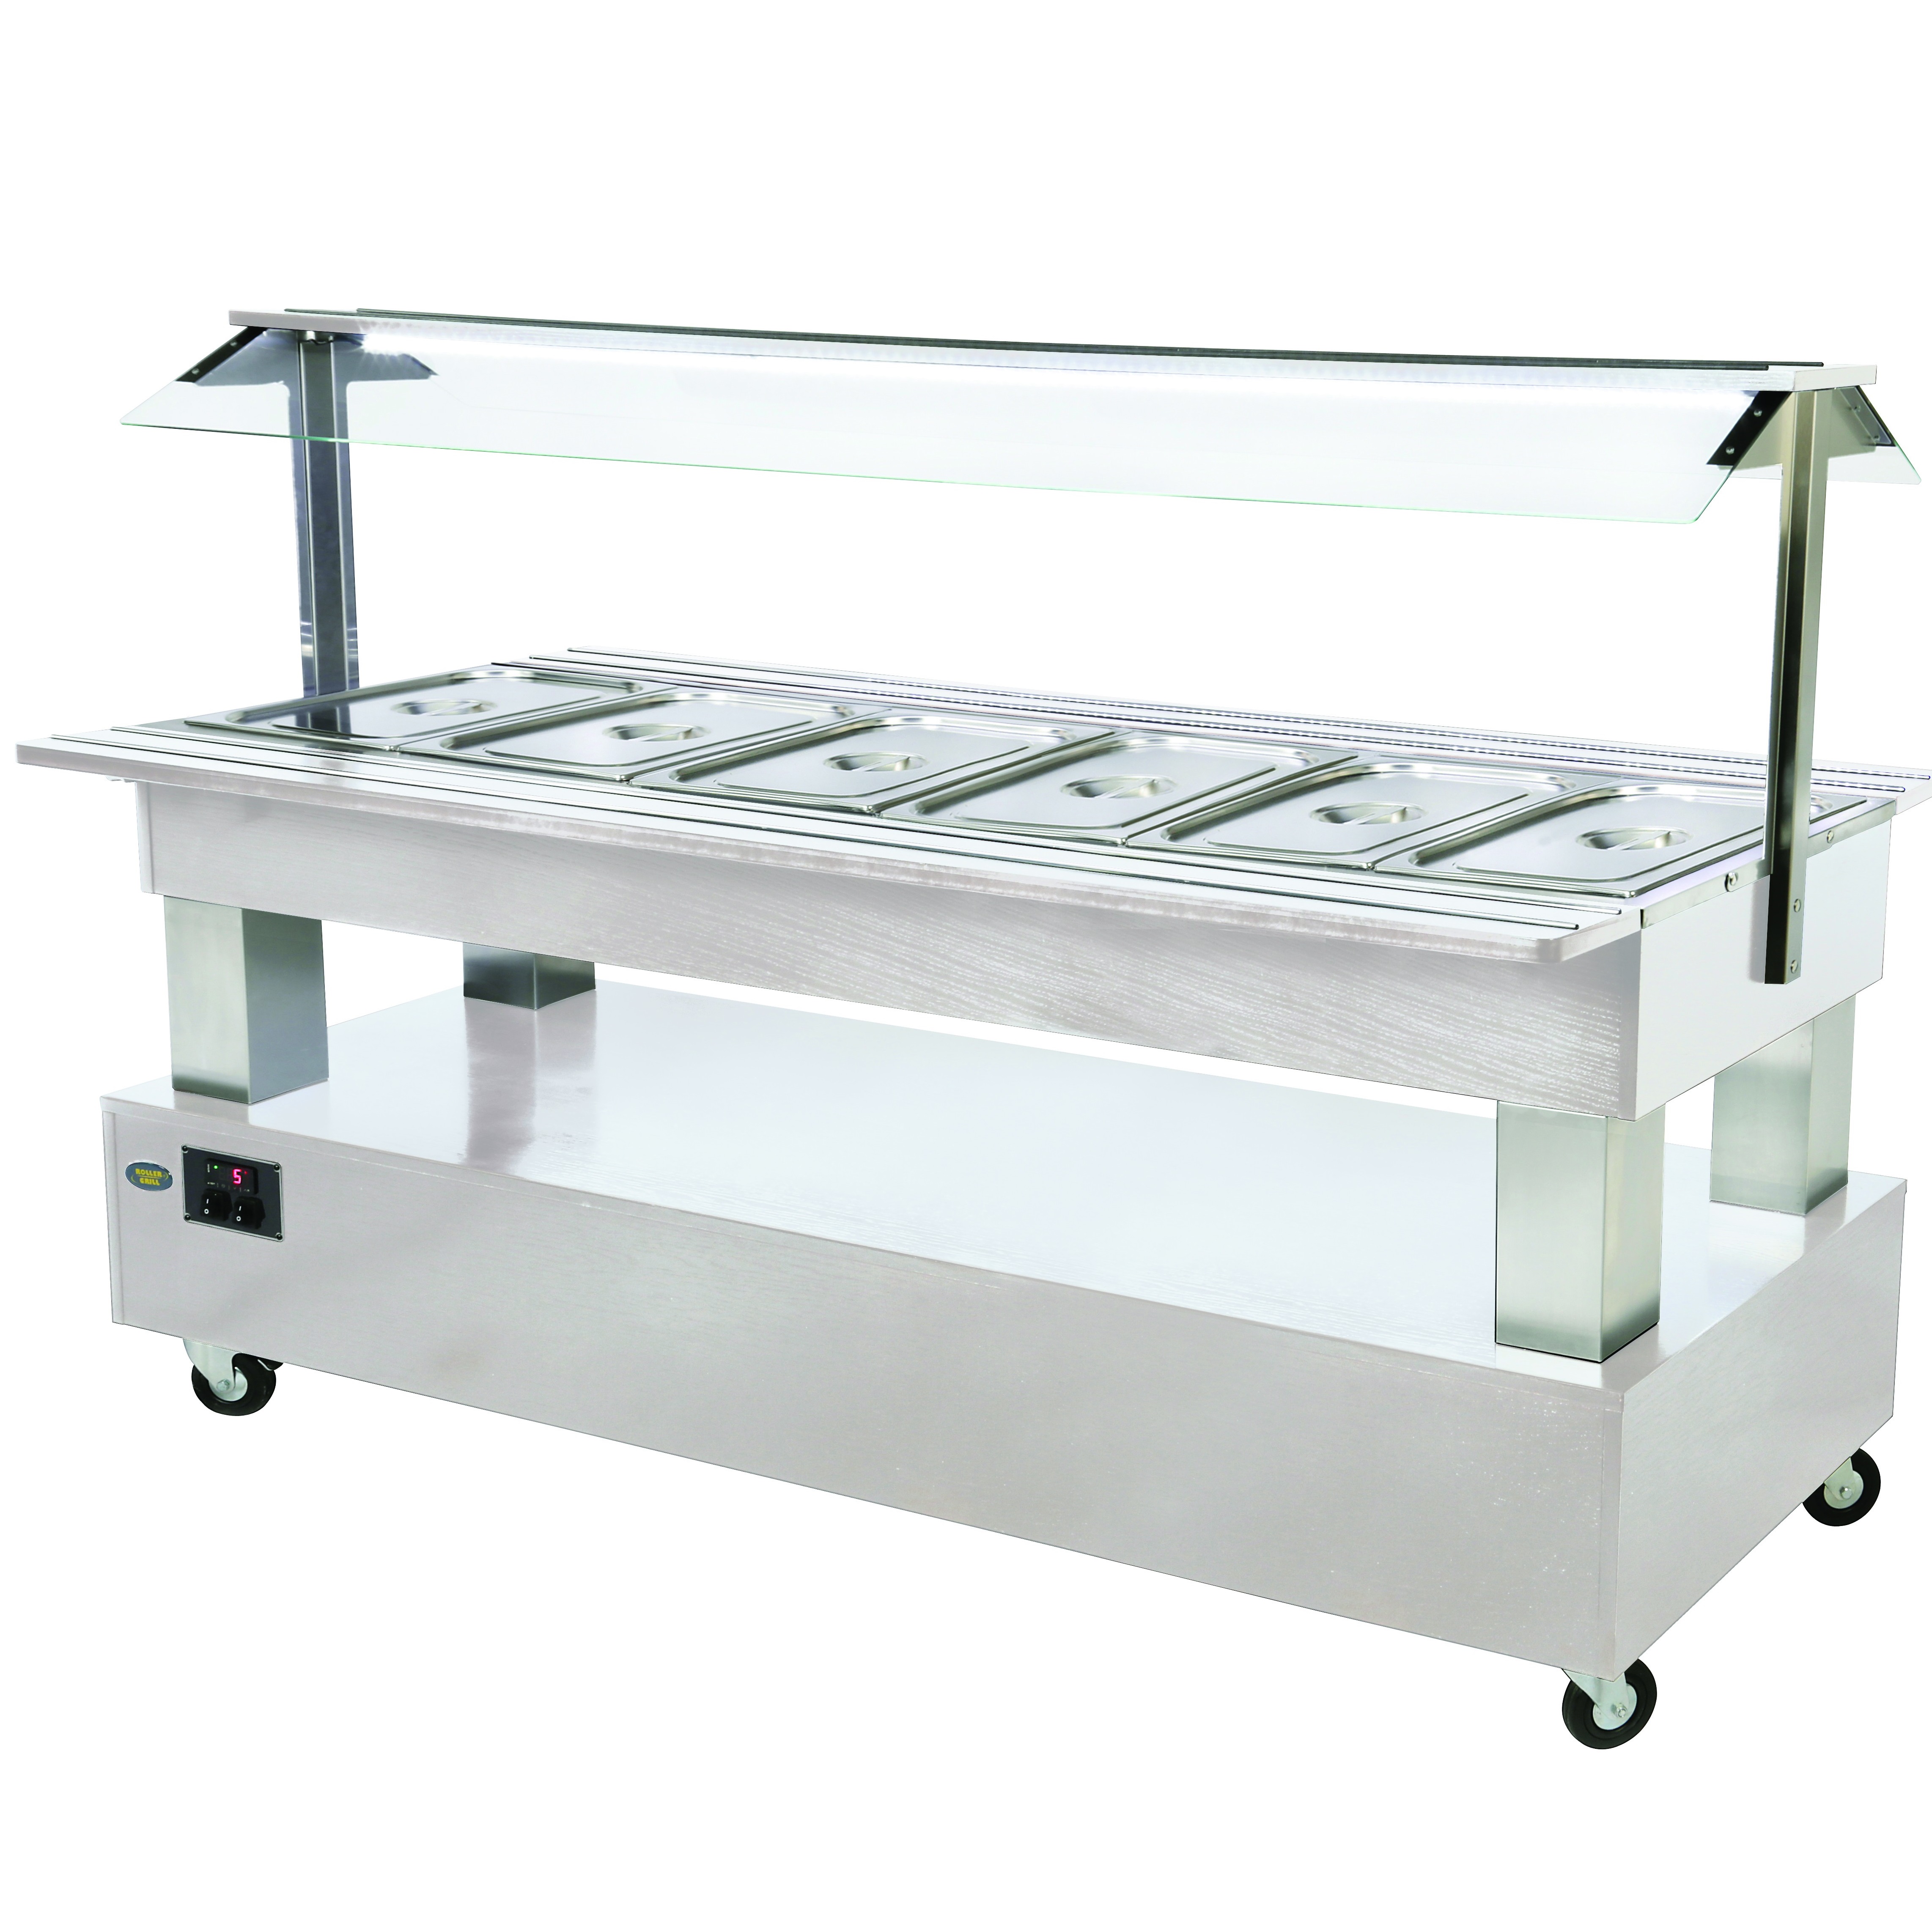 Roller Grill Refrigerated / Heated Buffet Bar in White SB60M